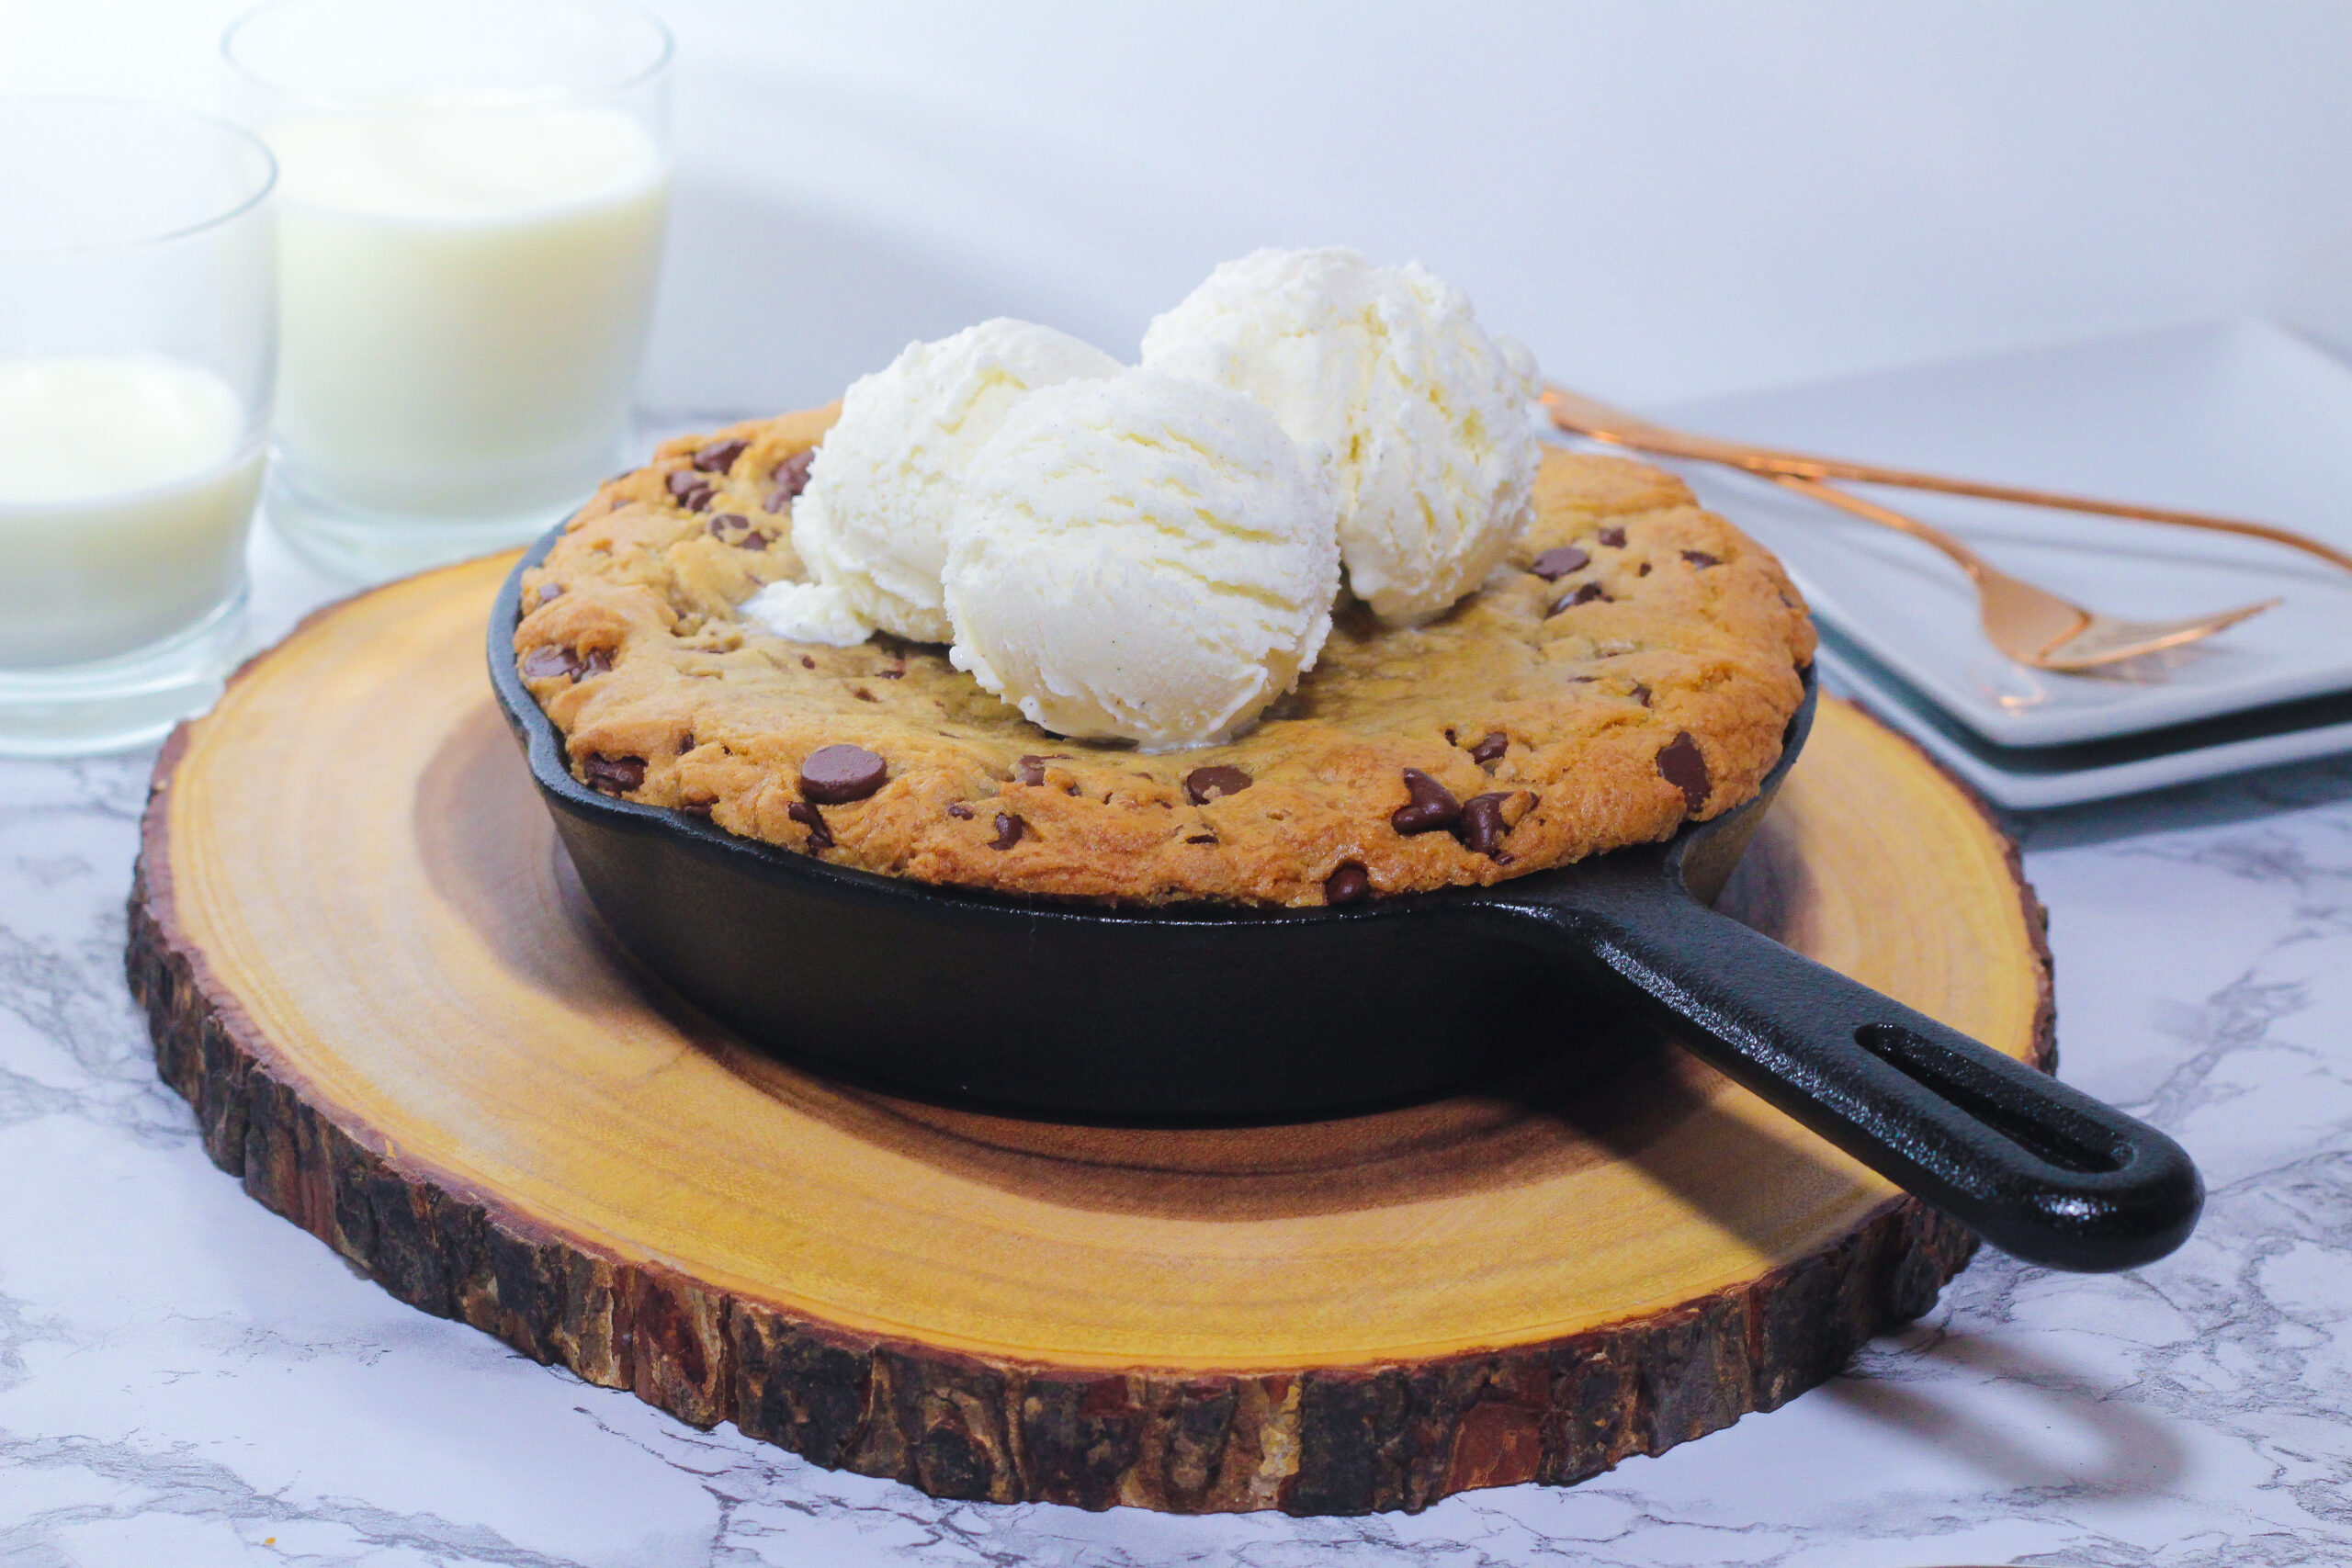 cast iron cookie topped with three scoops of vanilla ice cream in the skillet on a round piece of wood with two glasses of milk in the top left corner, one full and one less than half full, and two square white plates in the top right corner with two rose gold forks on them, all on a marbled surface